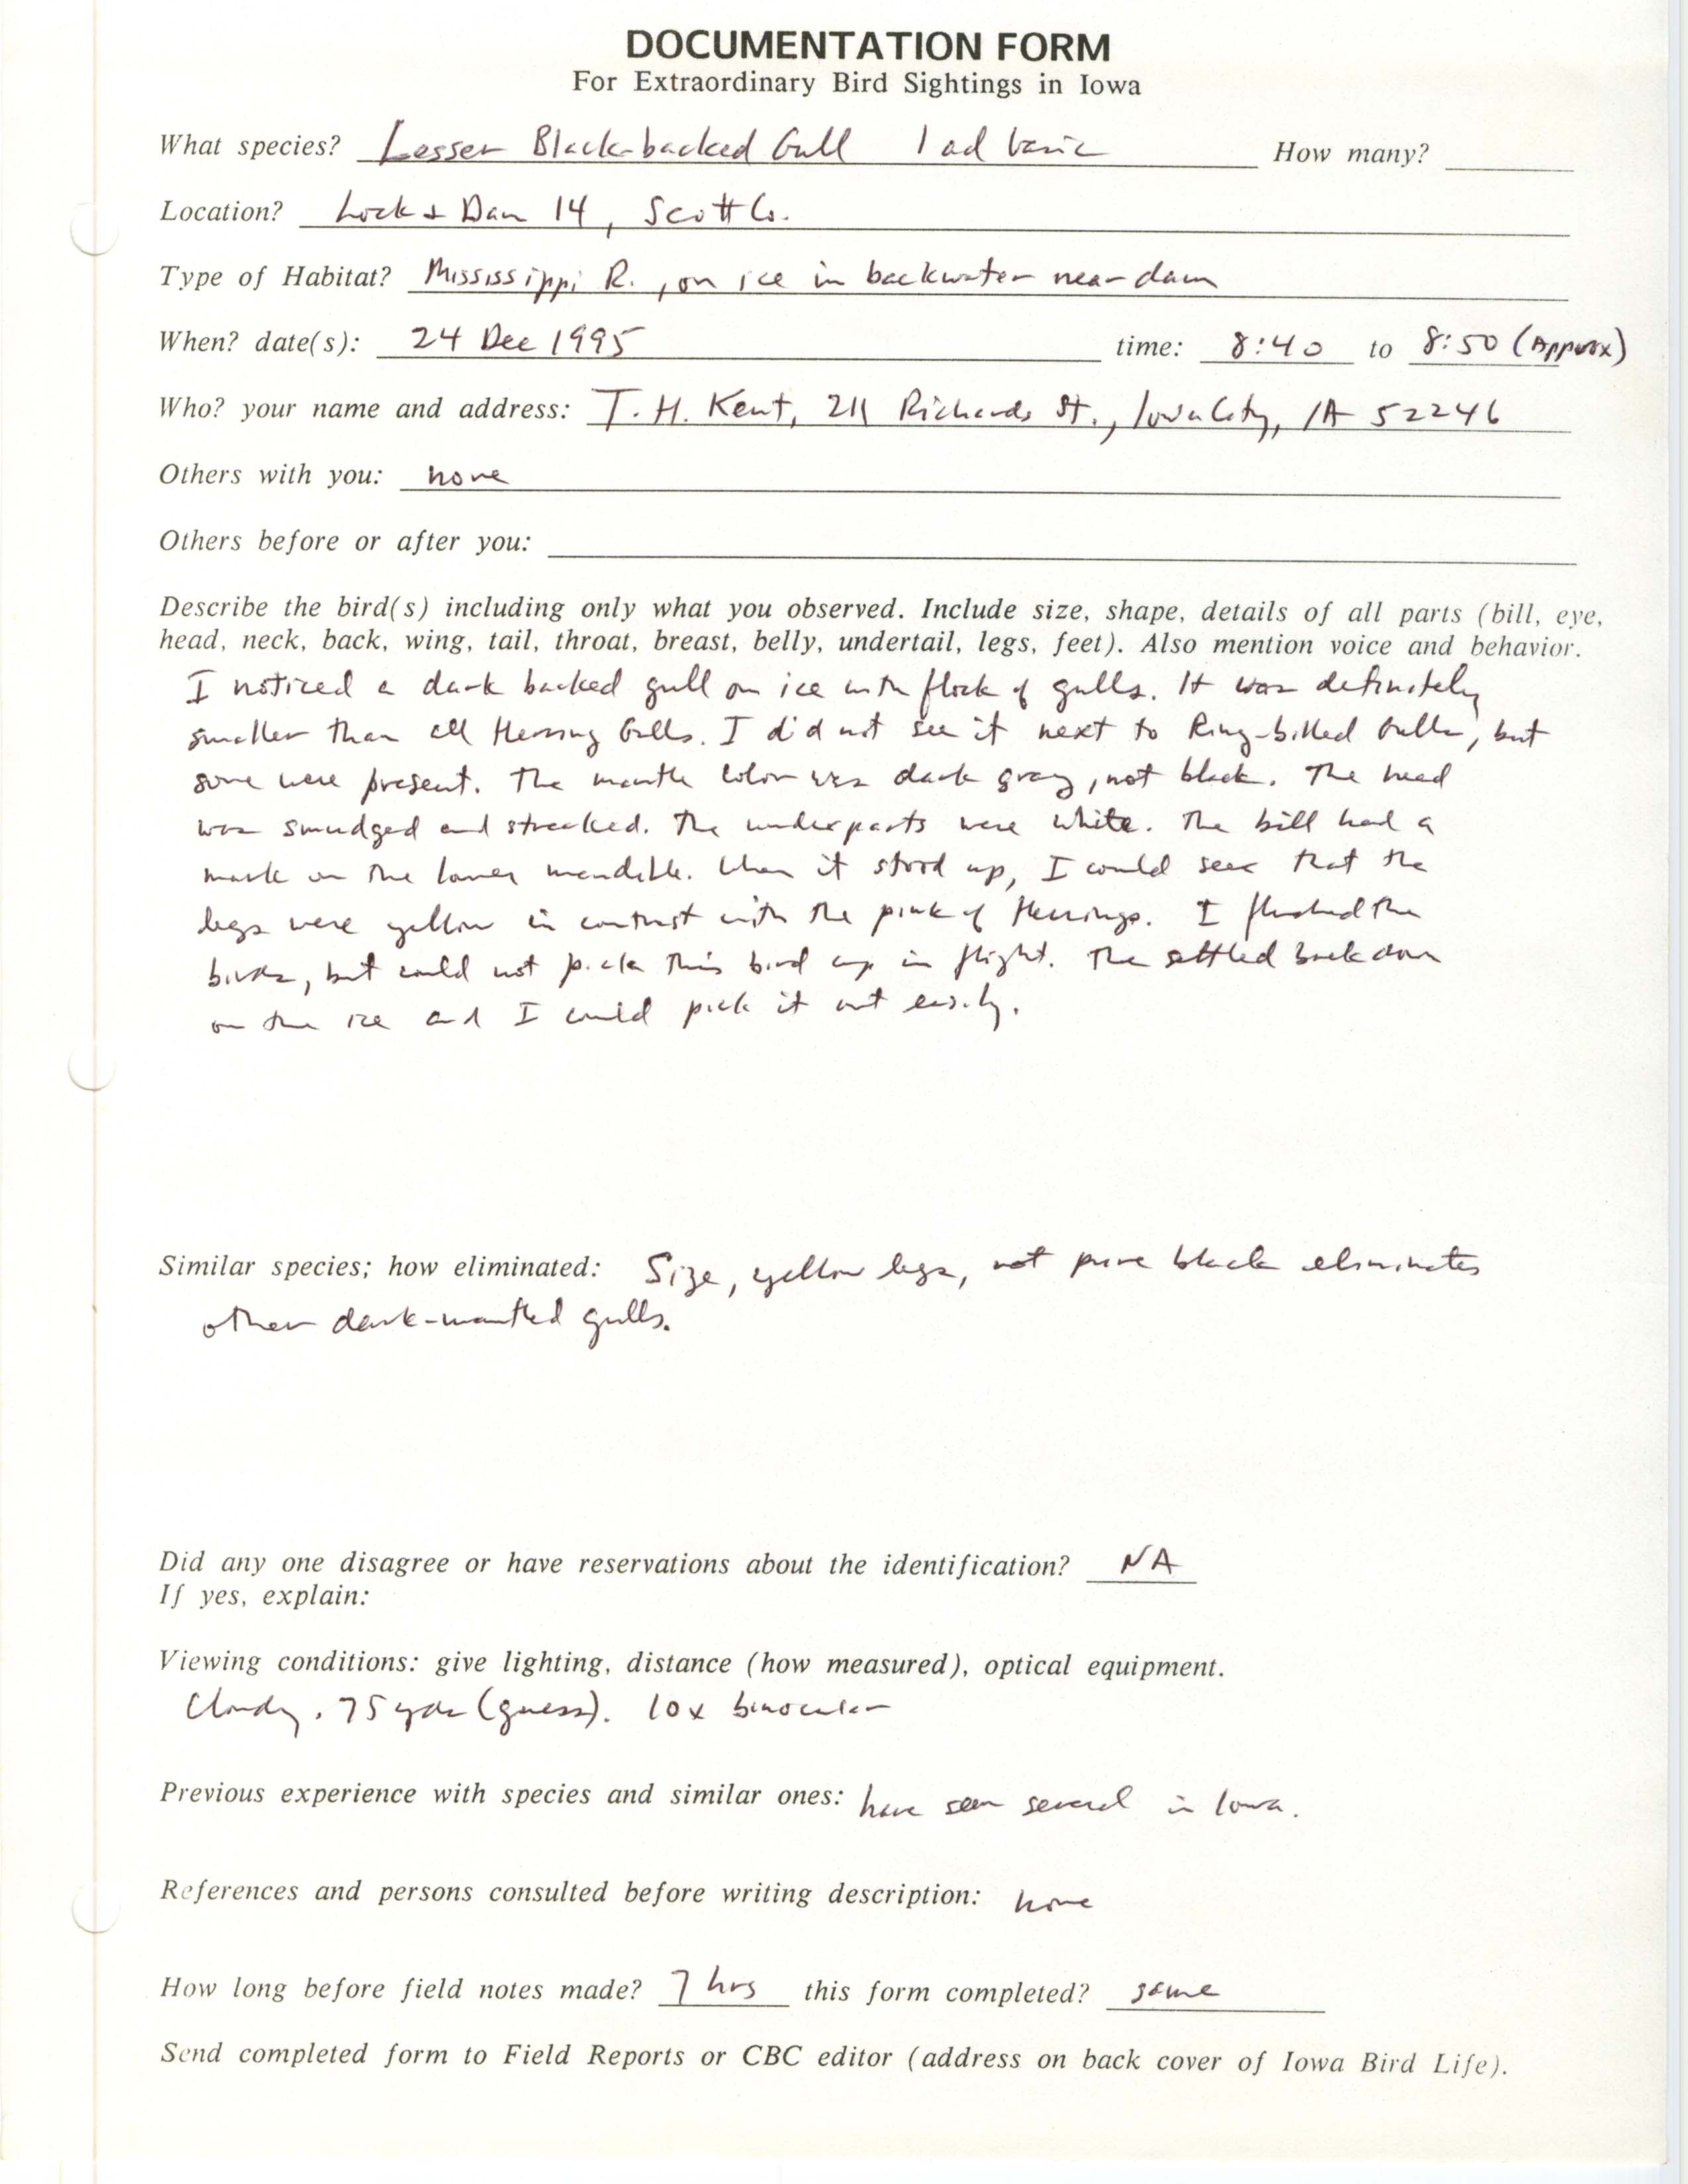 Rare bird documentation form for Lesser Black-backed Gull at Lock and Dam 14, 1995